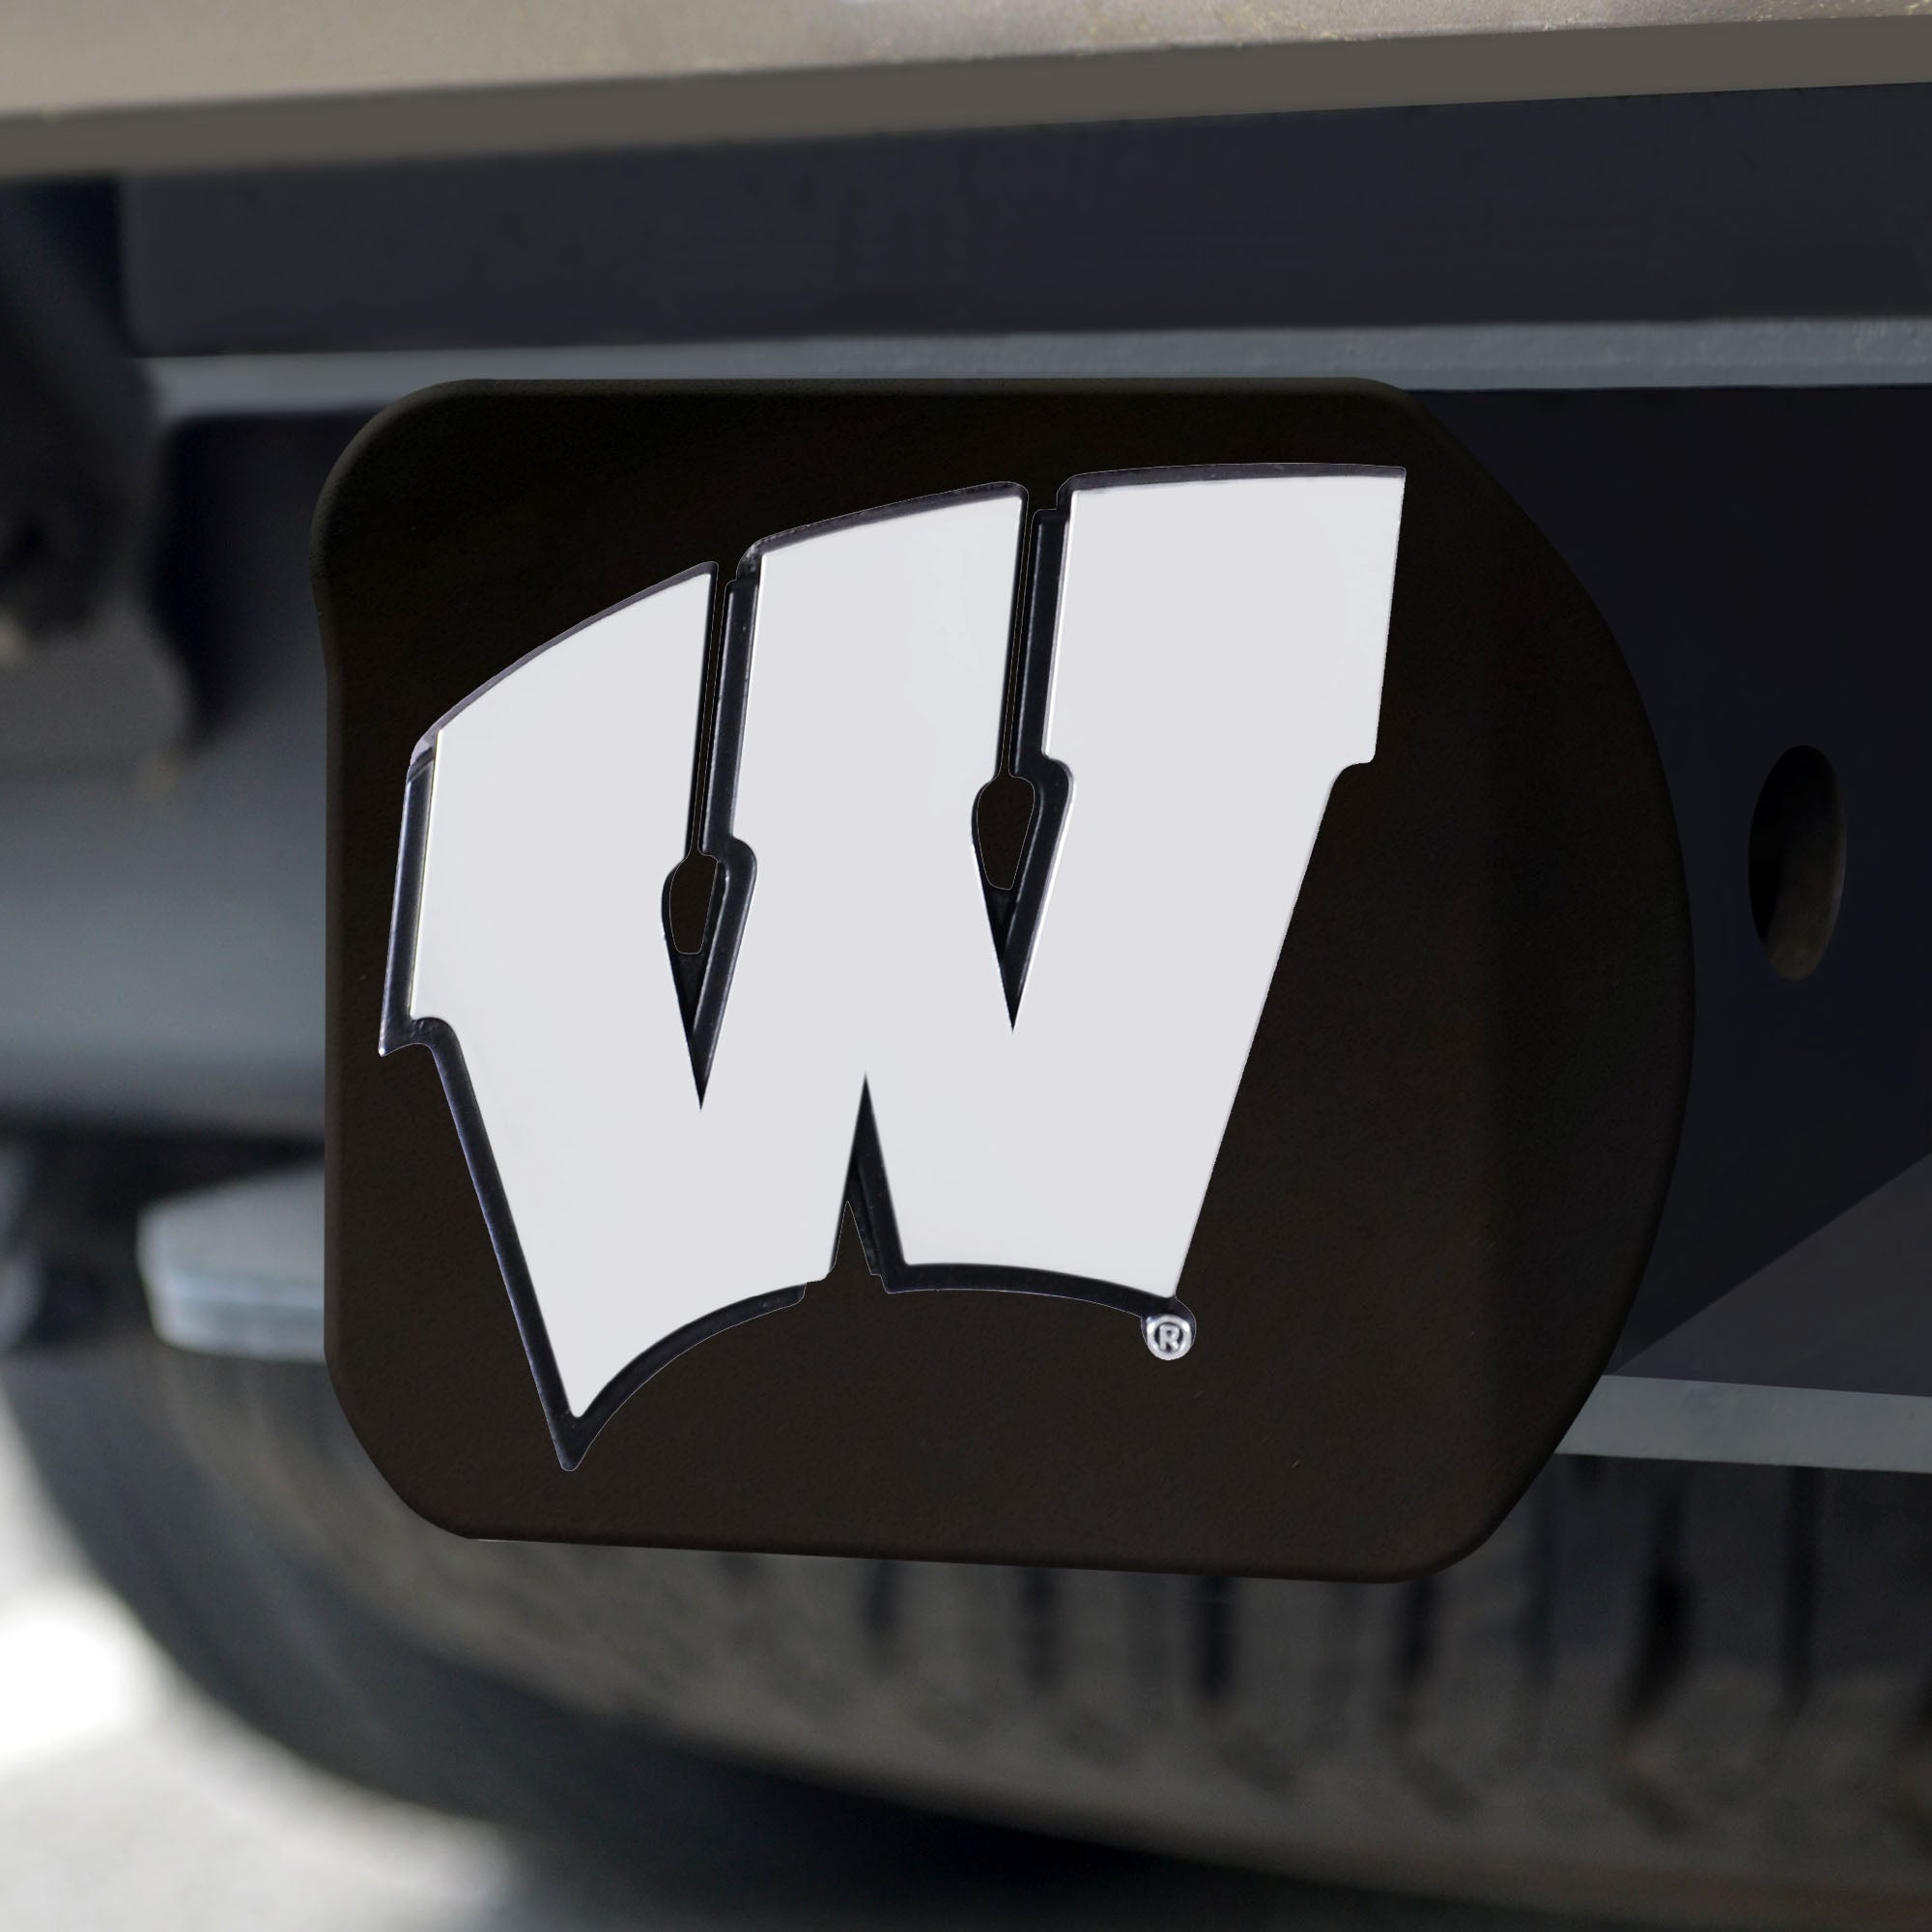 Wisconsin Badgers Chrome Hitch Cover - Black 3.4